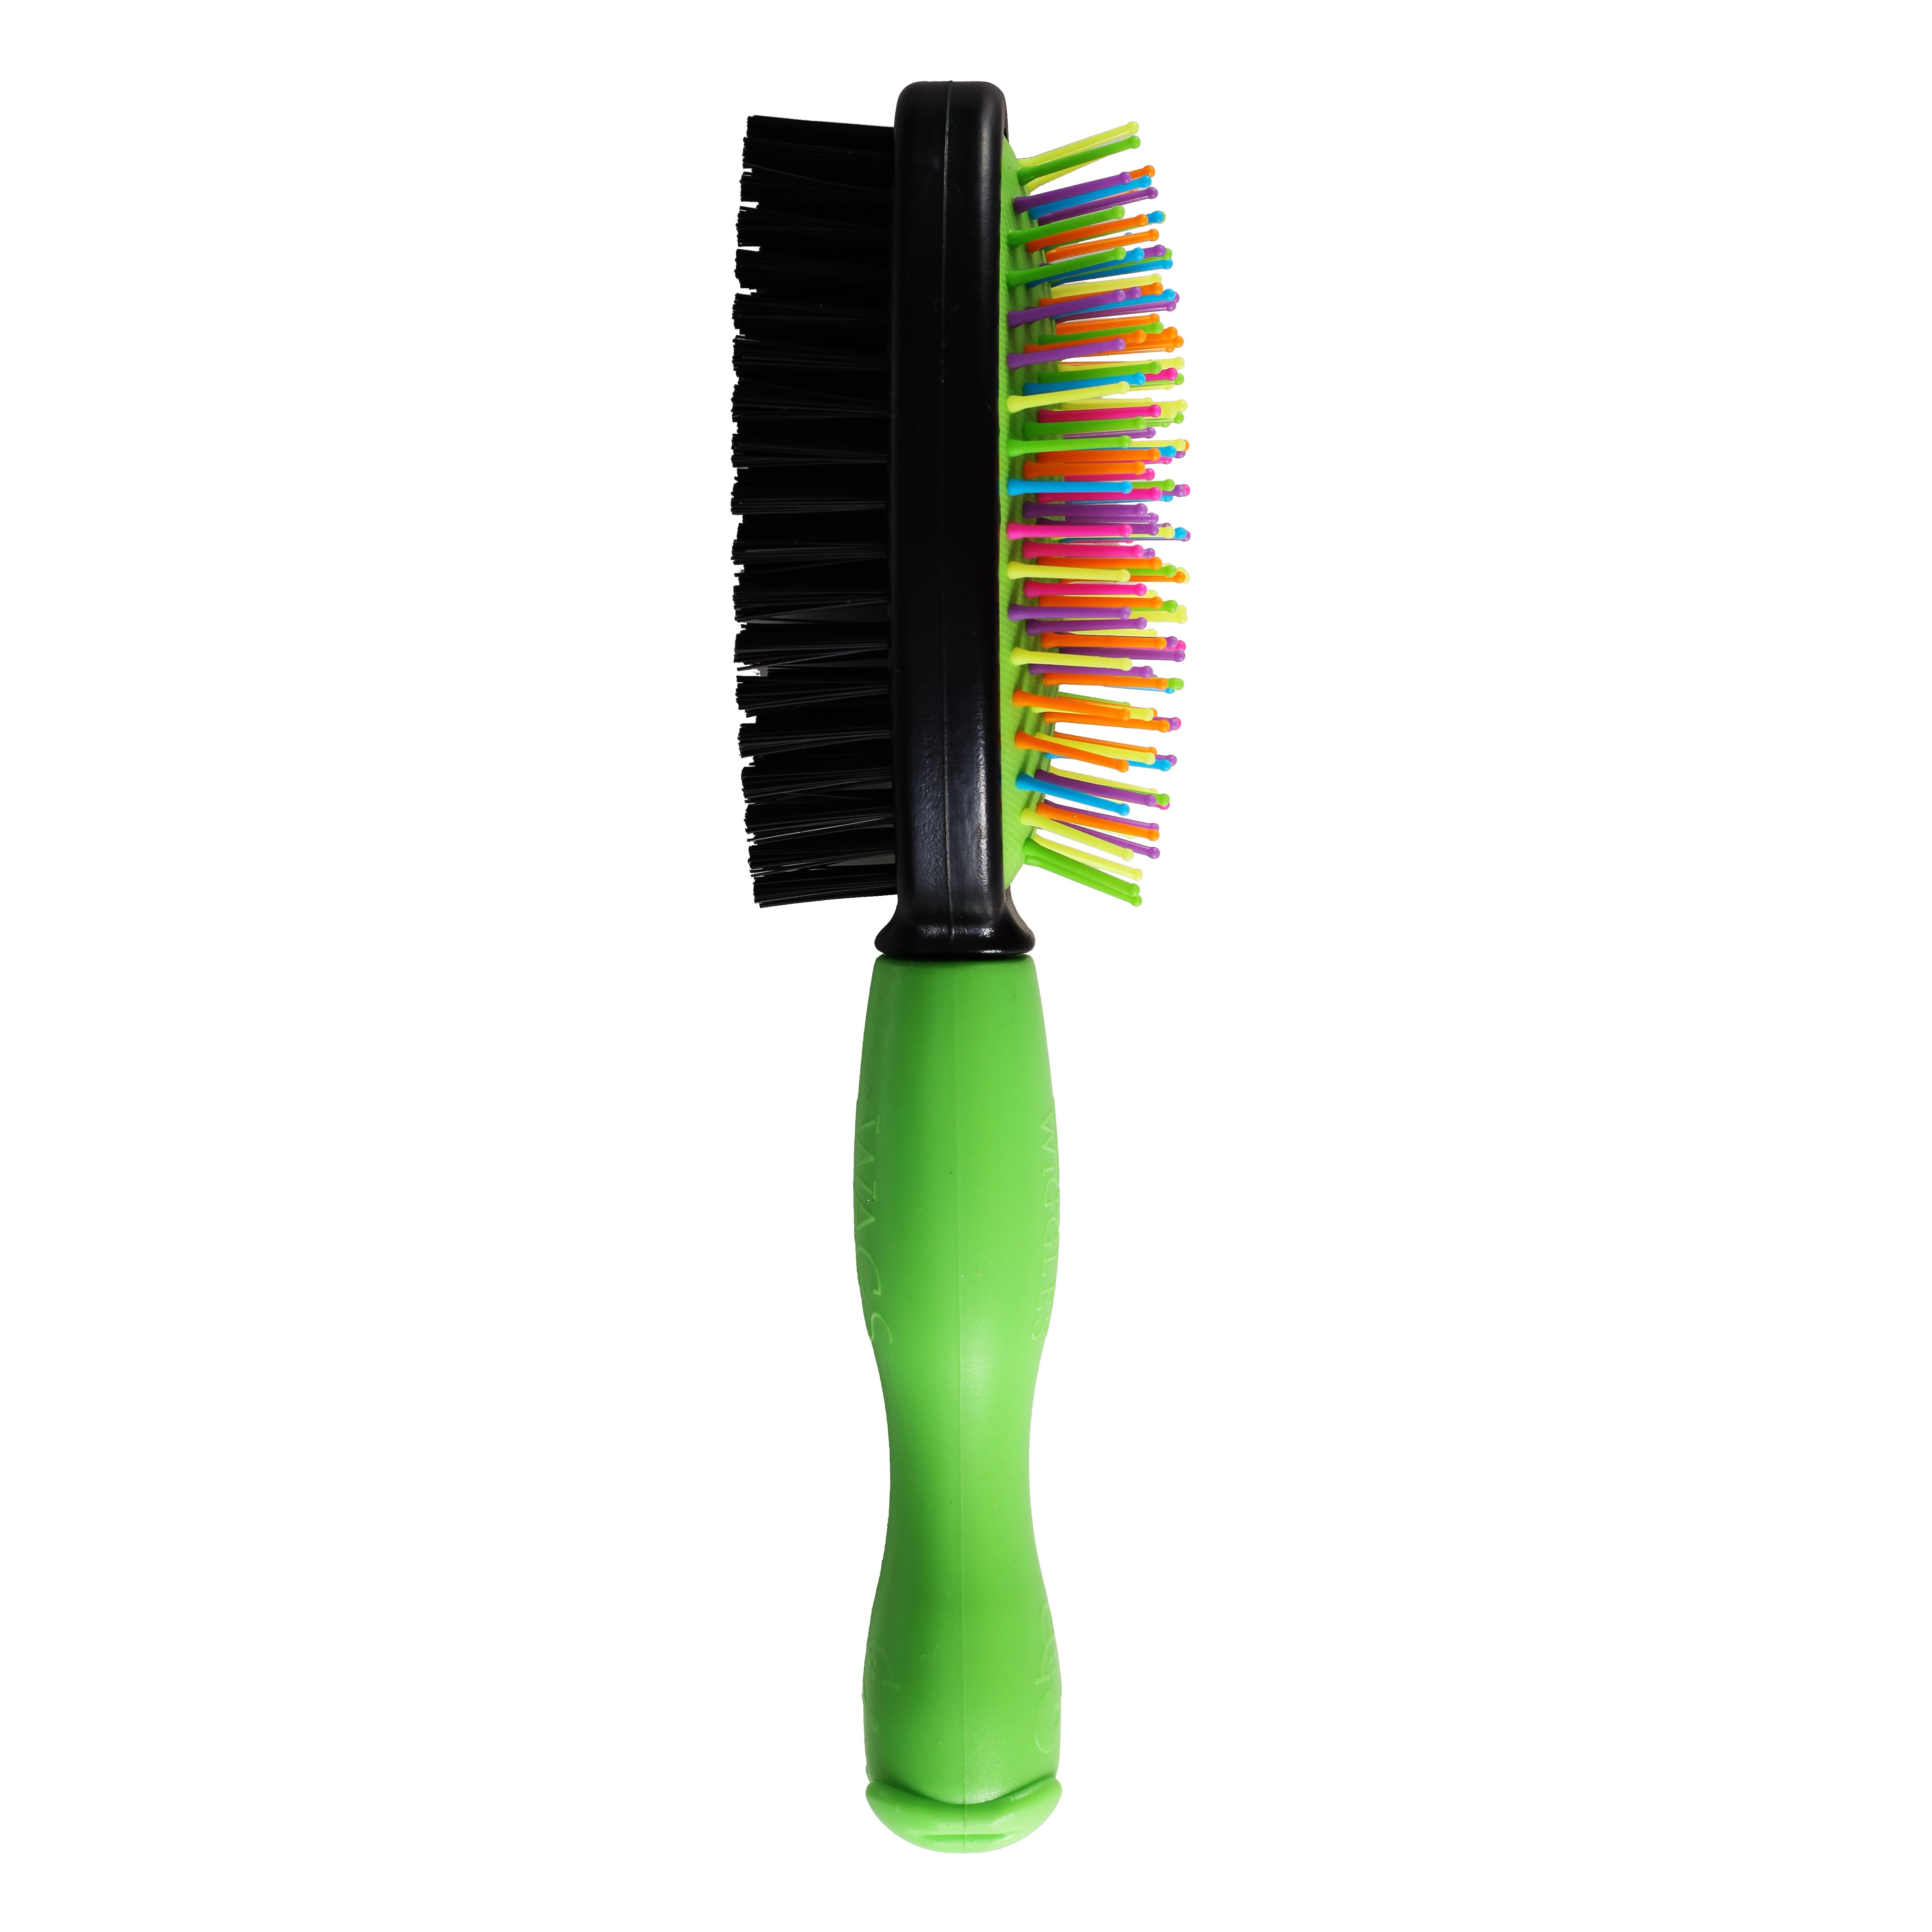 Wags & Wiggles Two-Sided Bristle and Squiggly Pin Brush For Small Dogs 